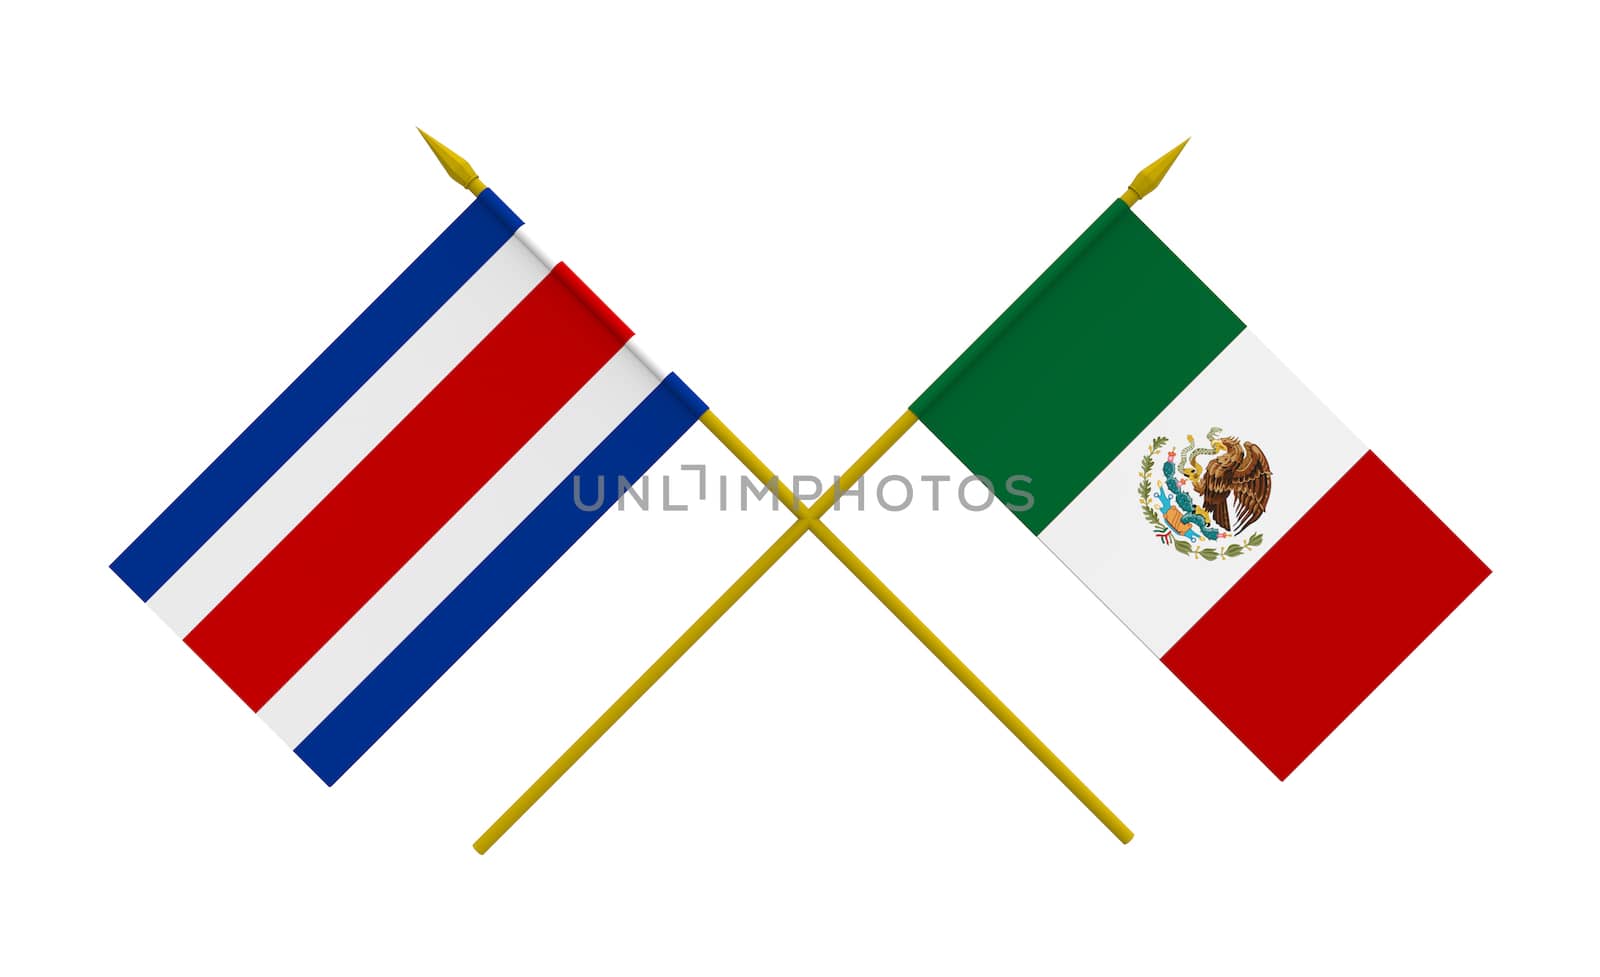 Flags of Mexico and Costa Rica, 3d render, isolated on white